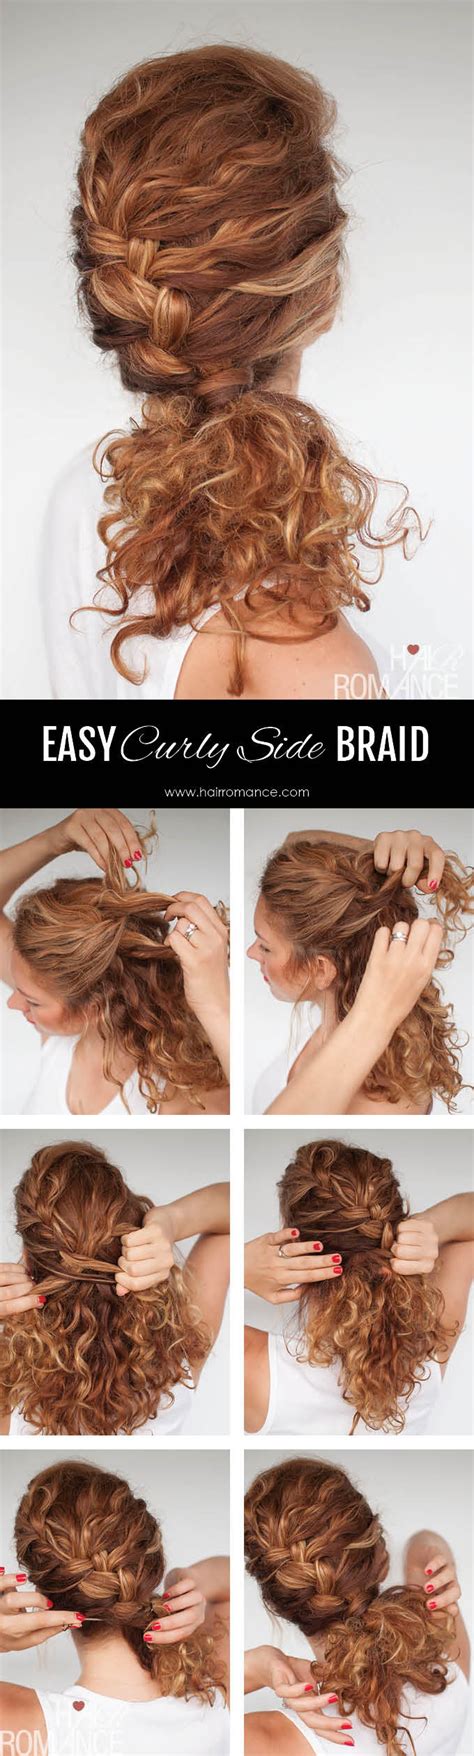 Try out one of our complete wash and go systems or take our curly hair quiz to get a personal recommendation. Easy everyday curly hairstyle tutorials - the curly side braid